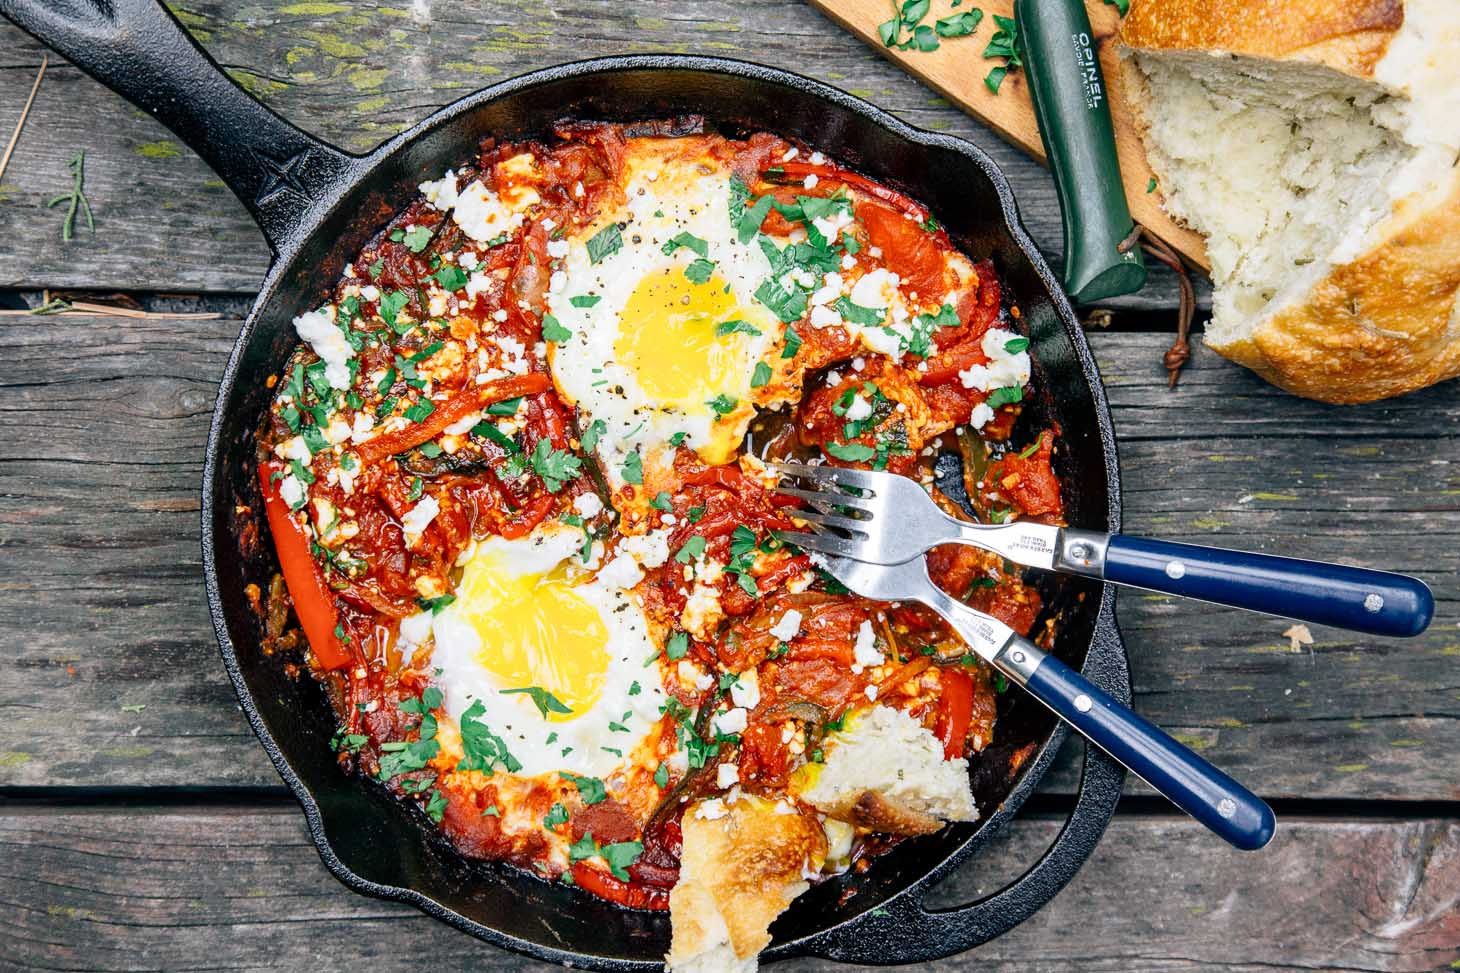 Camping Breakfast Skillet: One-Pan, Quick Prep & Cook Recipe